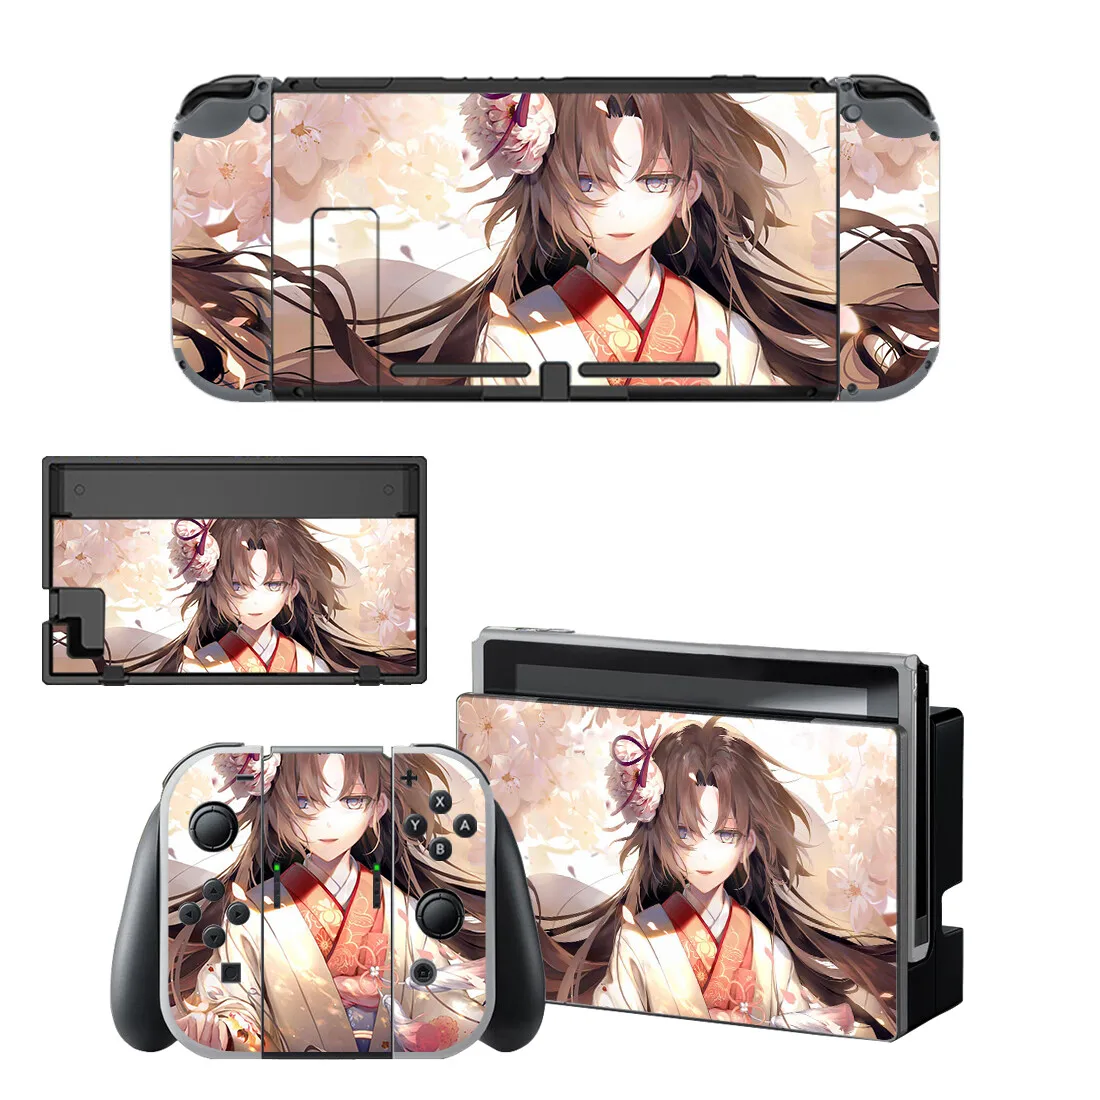 

Anime Cute Girl Vinyl Screen Skin Protector Stickers for Nintendo Switch NS Console + Controller + Stand Holder Dock Decal Skins